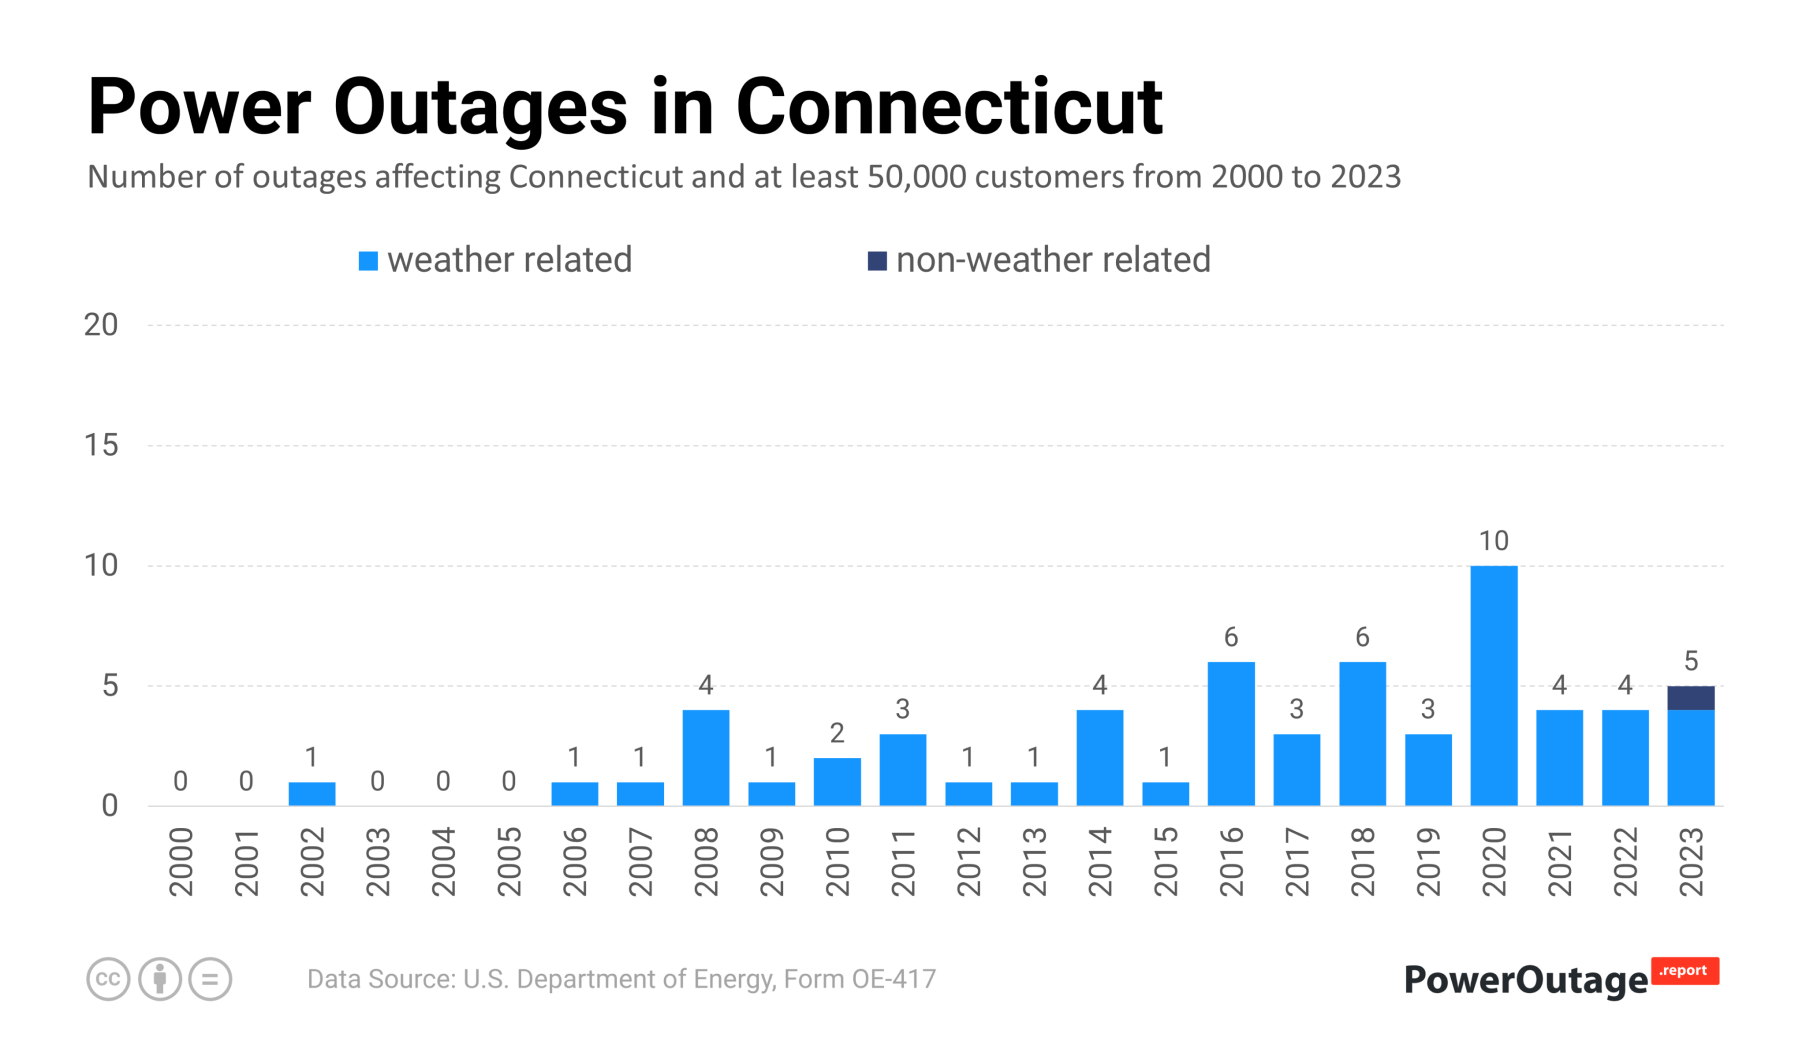 Connecticut Power Outage Statistics (2000 - 2021)